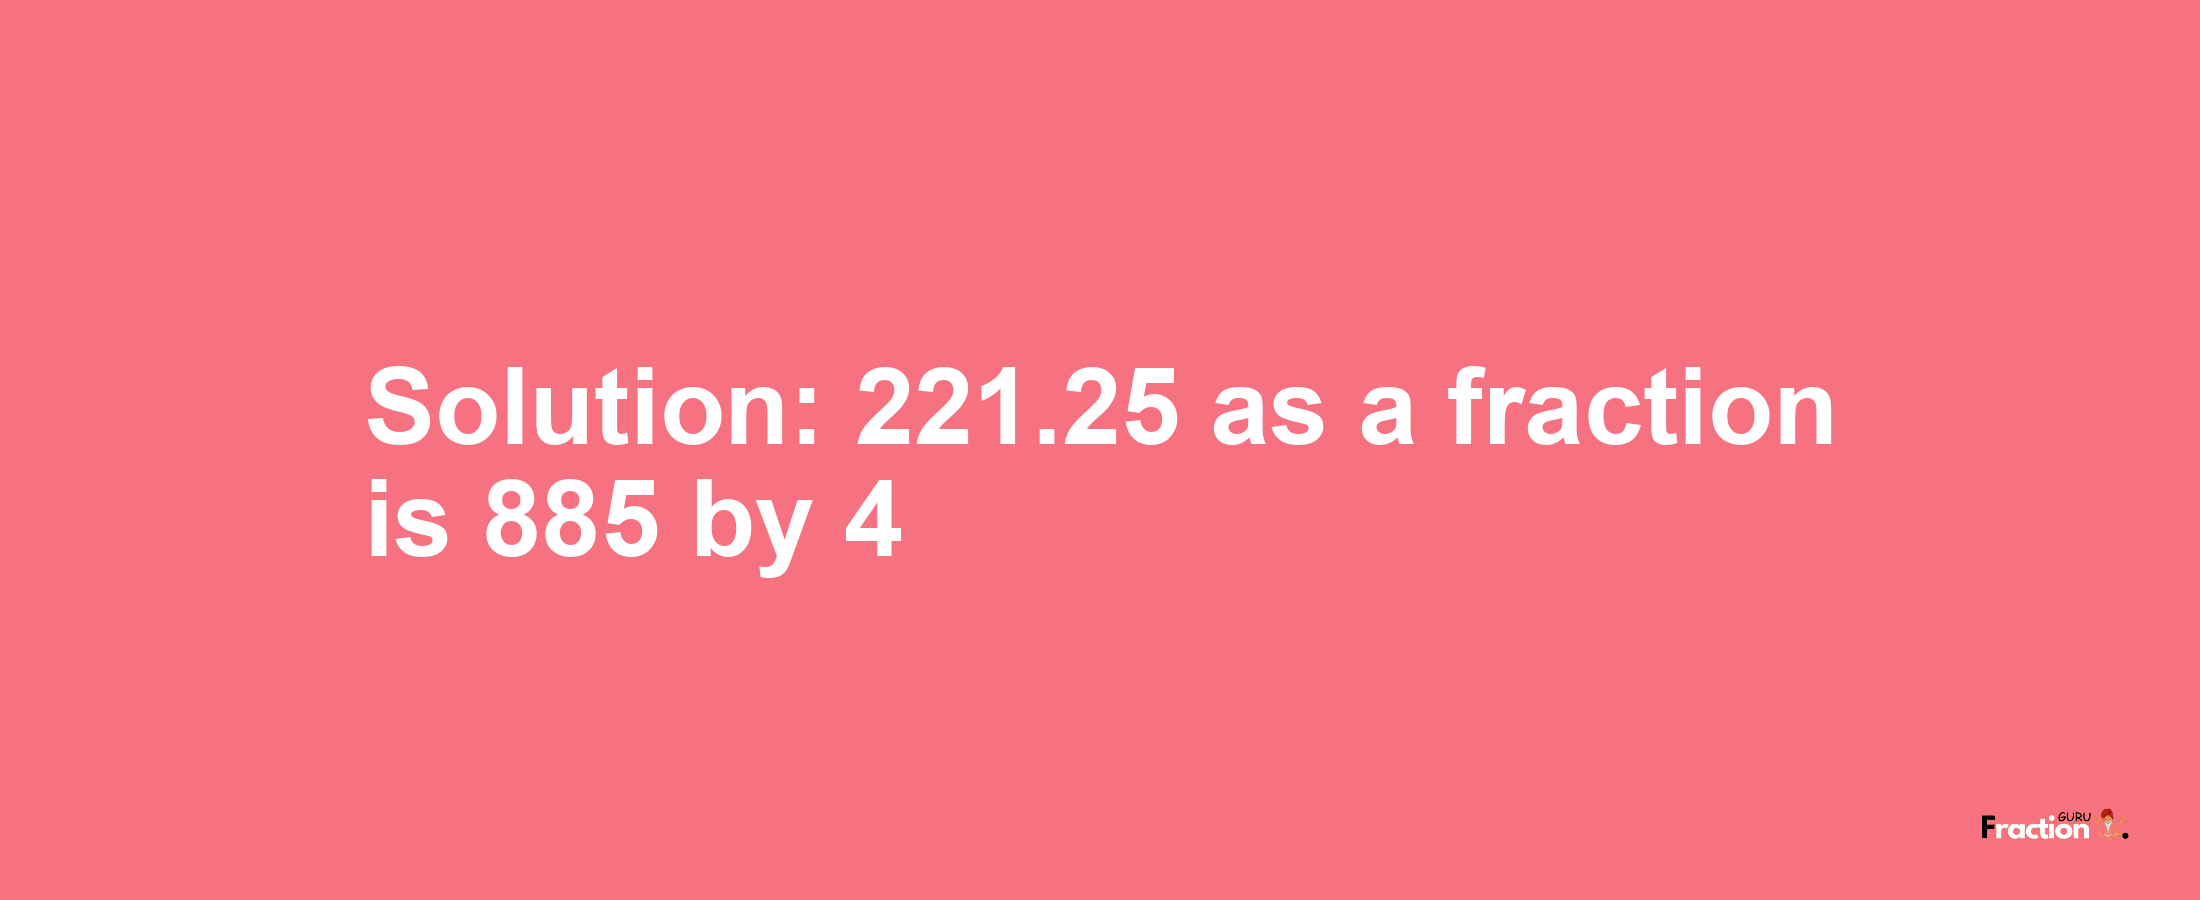 Solution:221.25 as a fraction is 885/4